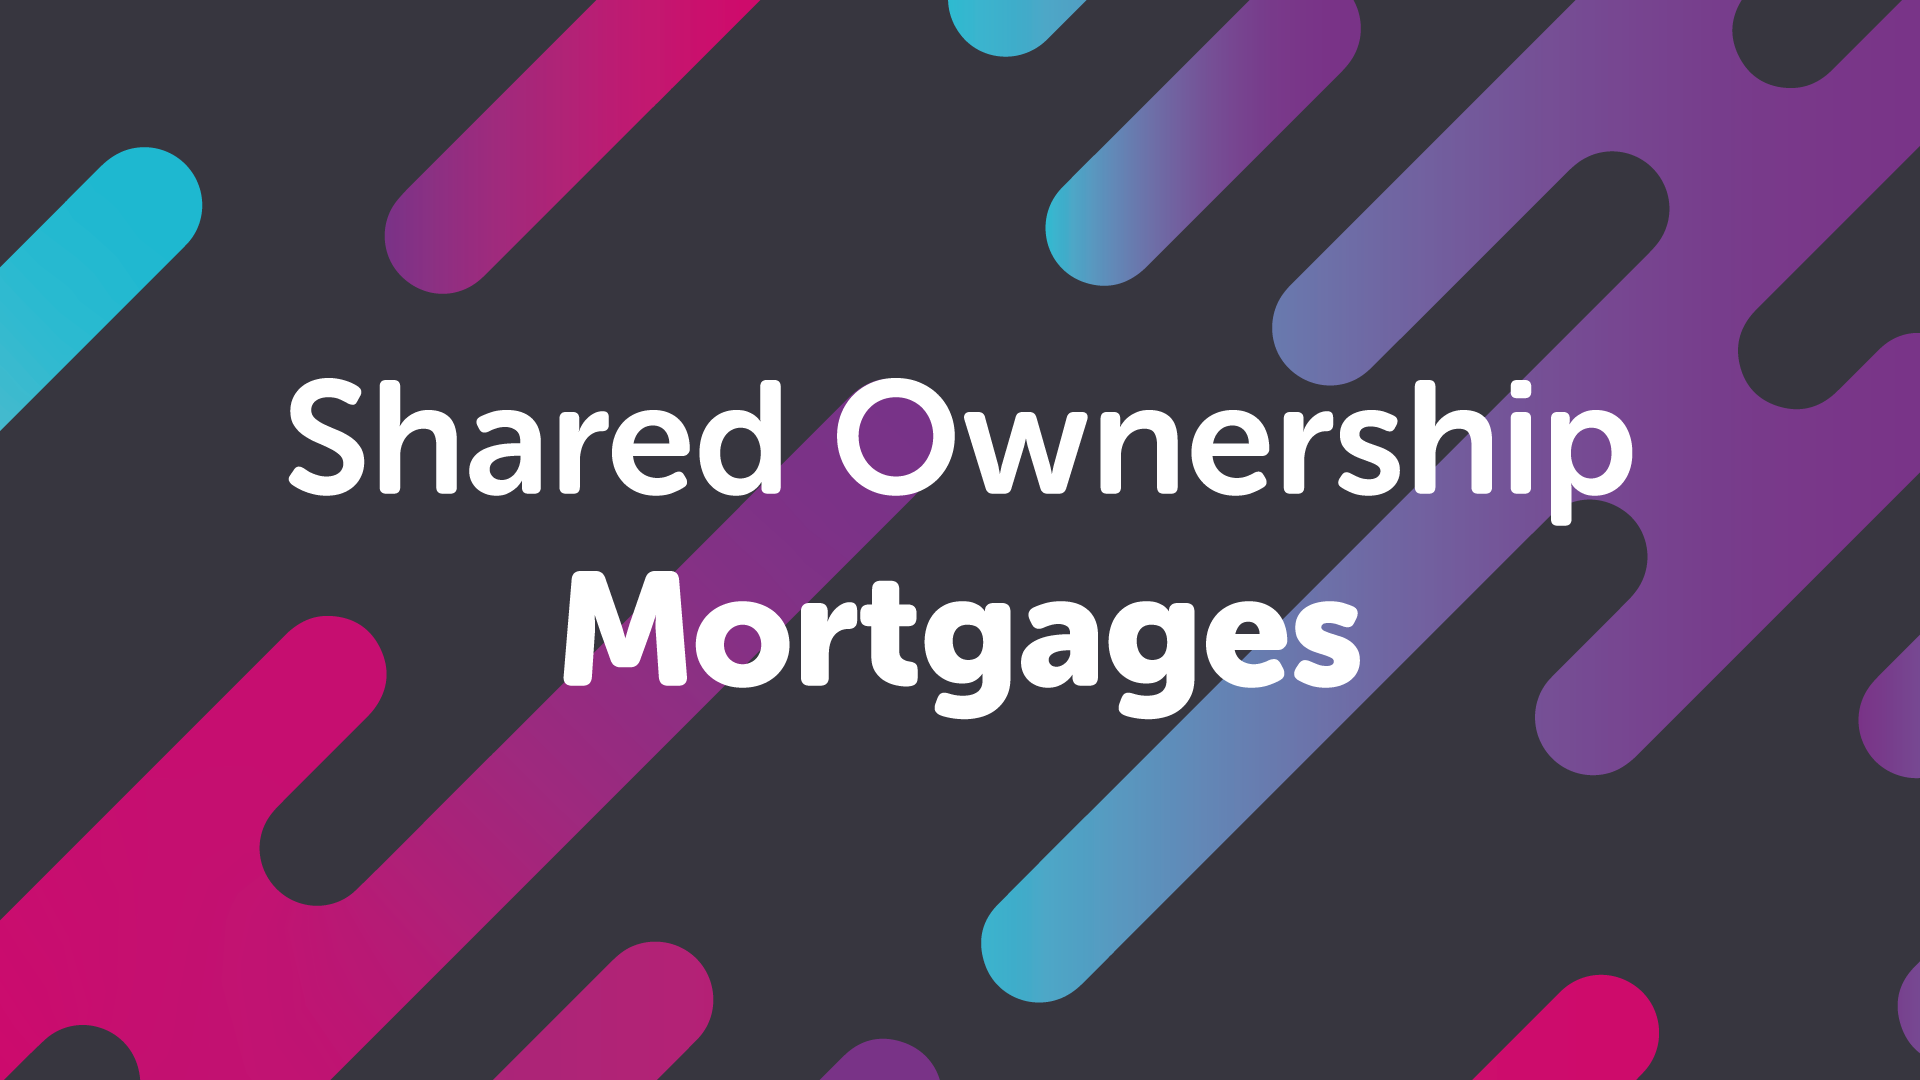 Shared Ownership Schemes For First Time Buyers